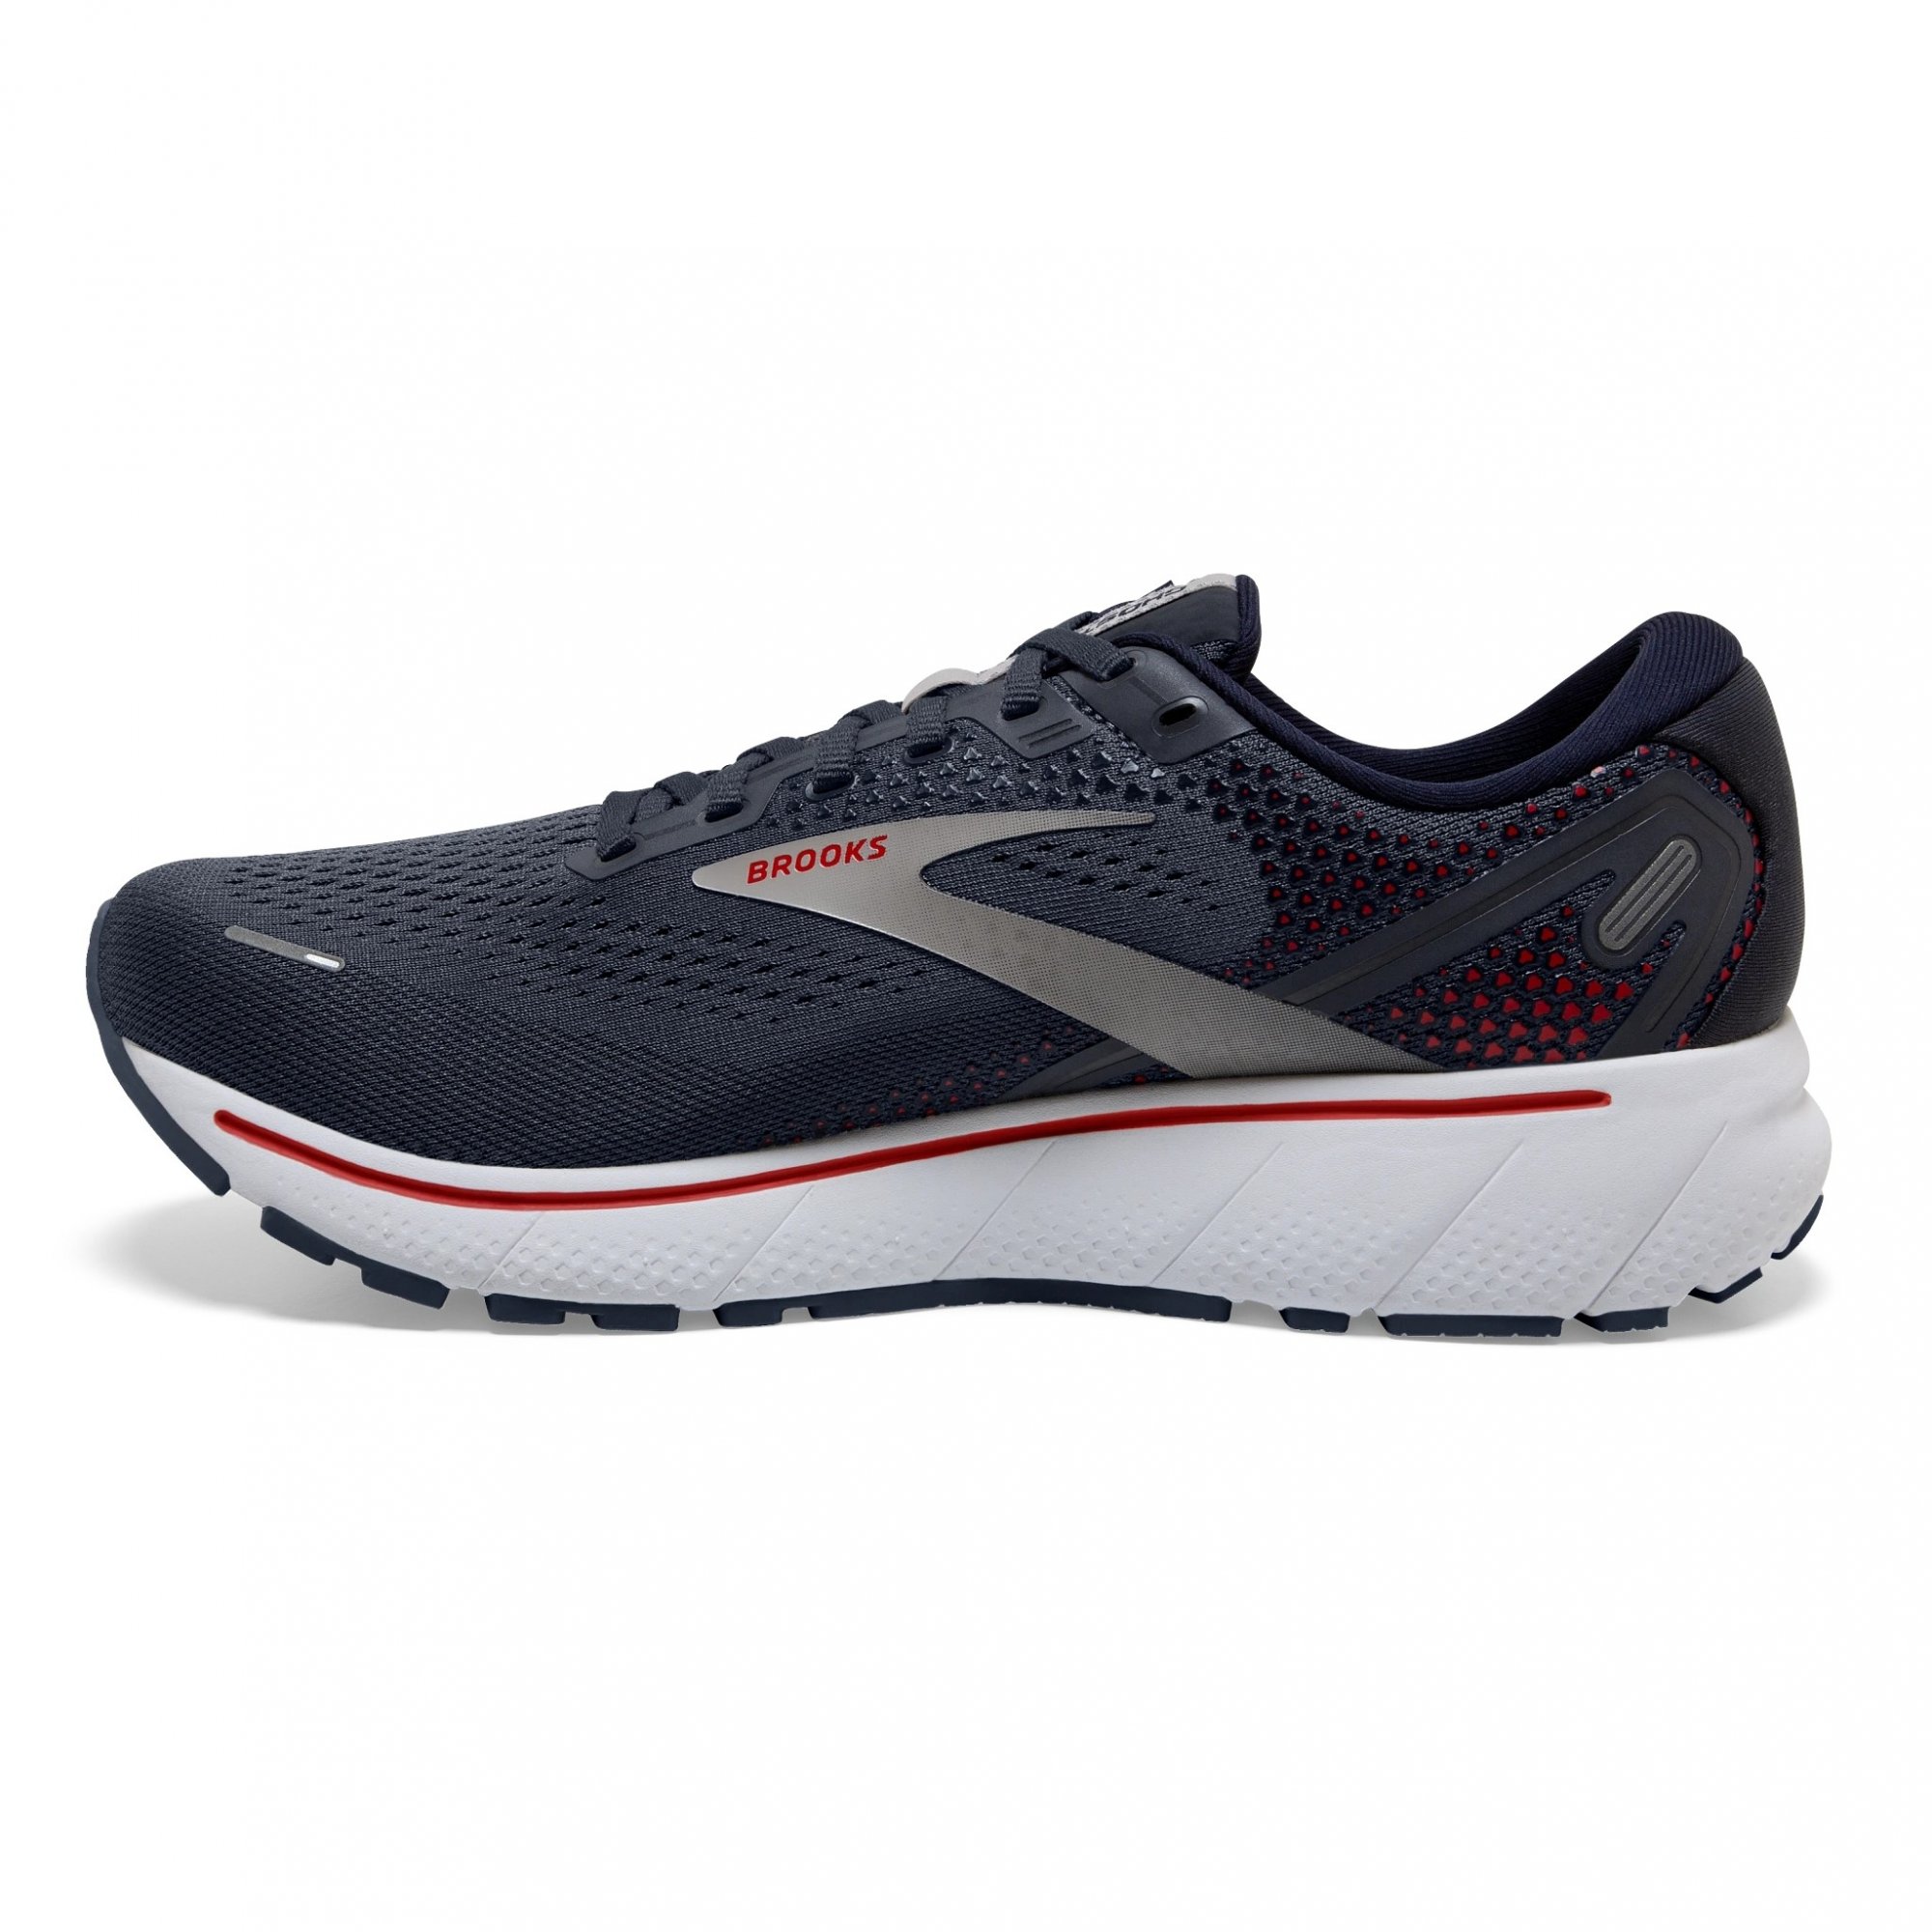 XXX BROOKS Ghost 14 Vivid Peacoat/India Ink/High Risk Red